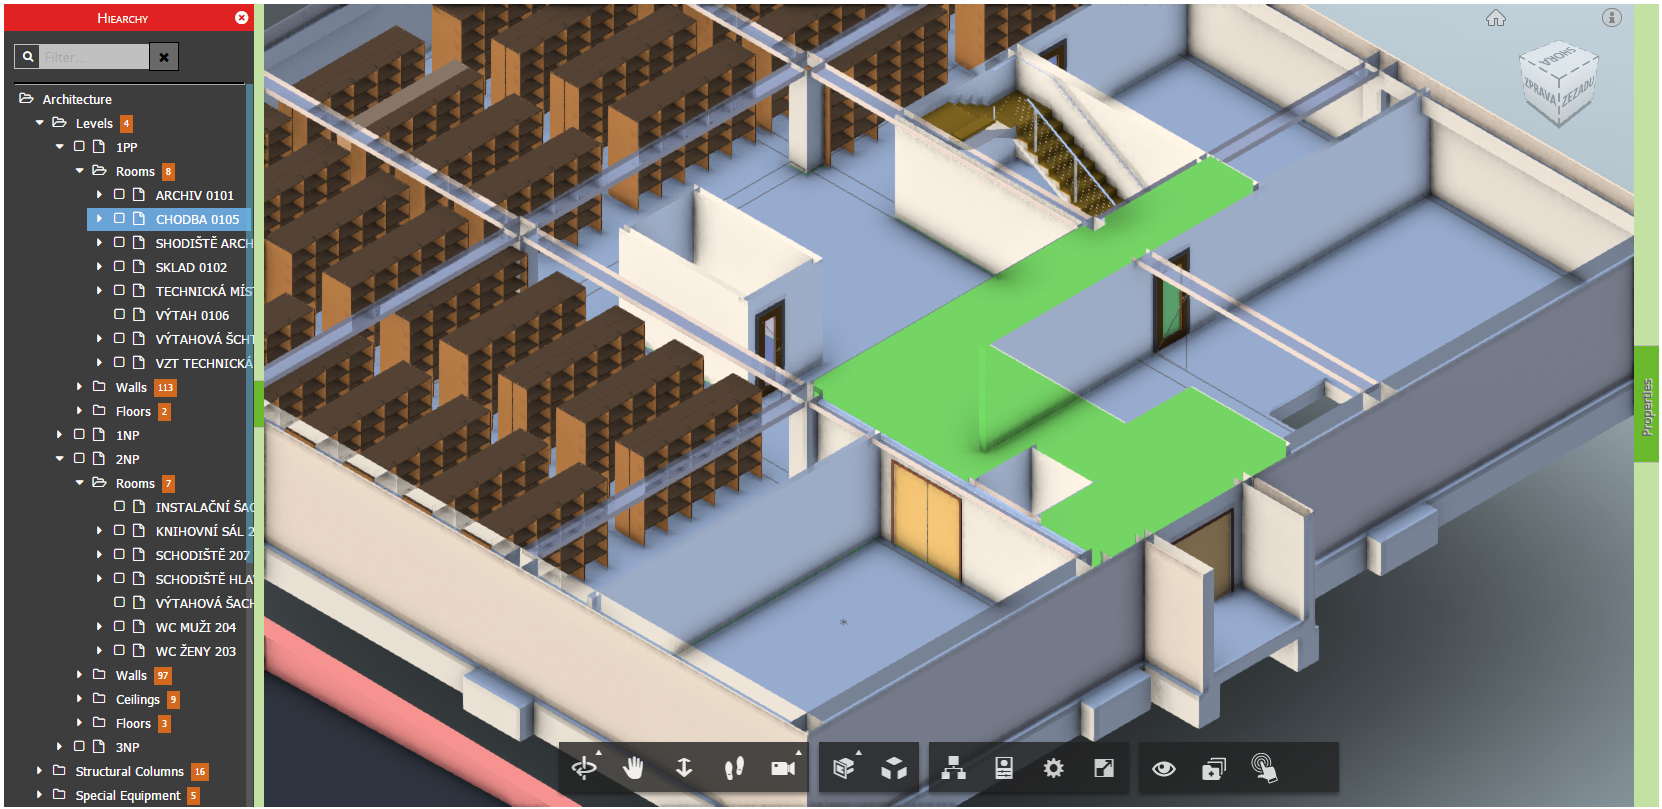 Viewer highlight room — a complicated room shape